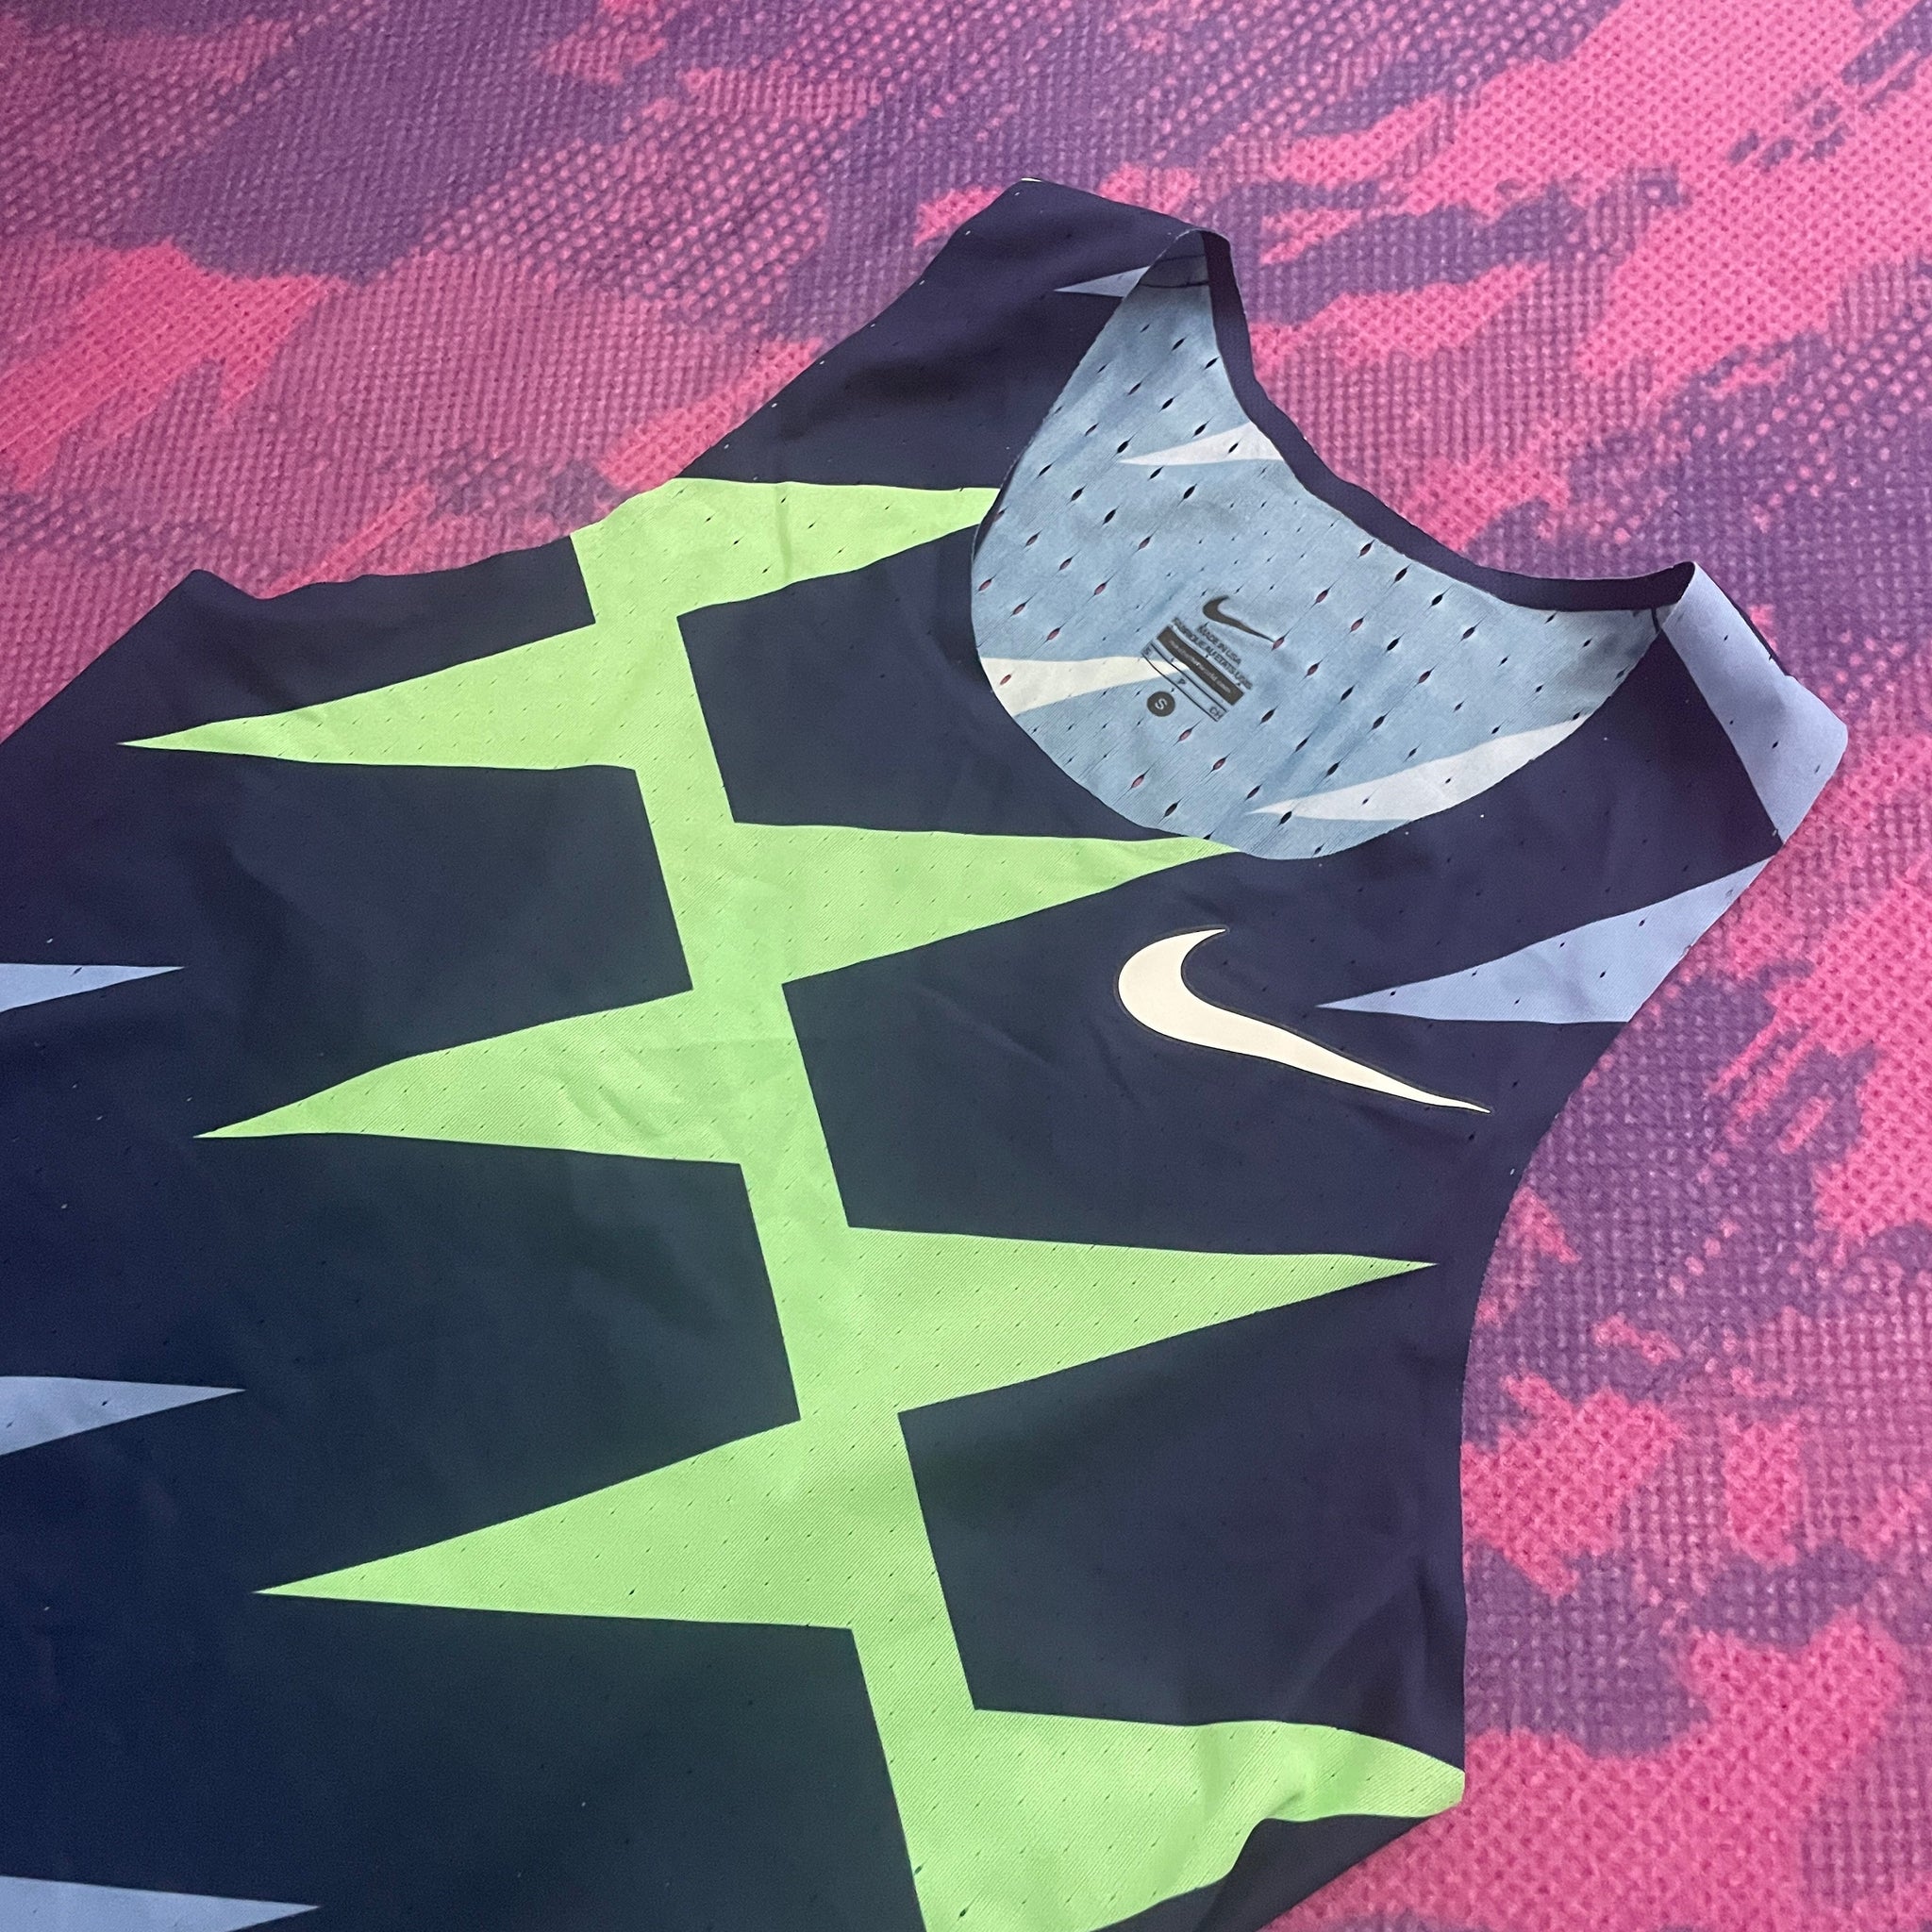 2020/21 Nike Pro Elite Distance Singlet (S) – Bell Lap Track and Field